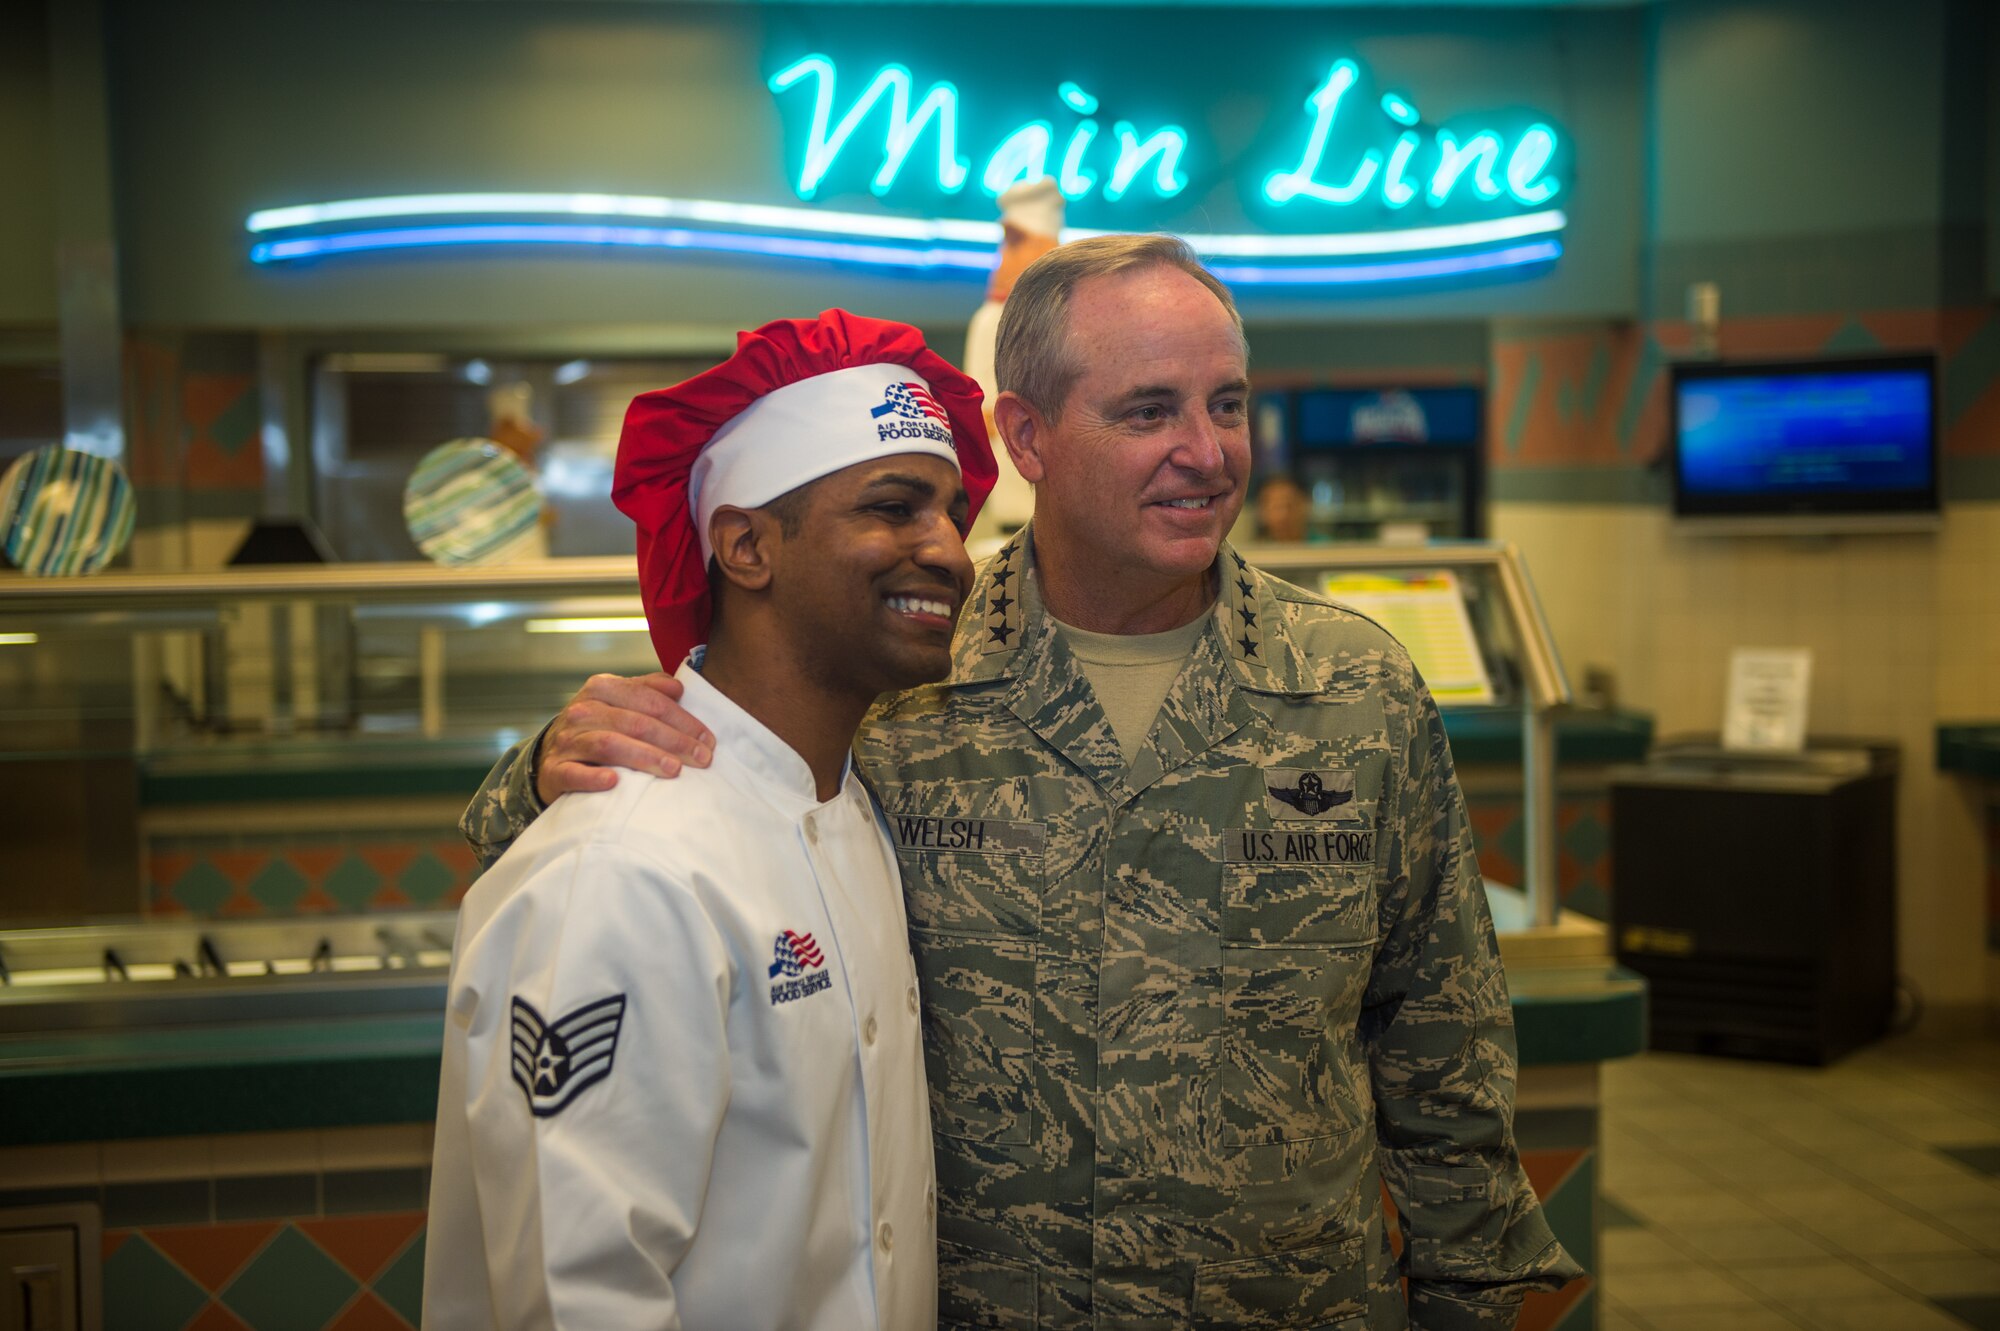 Air Force Chief of Staff Gen. Mark A. Welsh III poses for a photo with Staff Sgt. Raymond Soto-Pacheco, 1st Special Operations Force Support Squadron services craftsman, before having lunch with Air Force Special Operations Command Airmen at the Riptide Dining Facility at Hurlburt Field, Fla., Sept. 30, 2015. (U.S. Air Force photo by Airman Kai White)